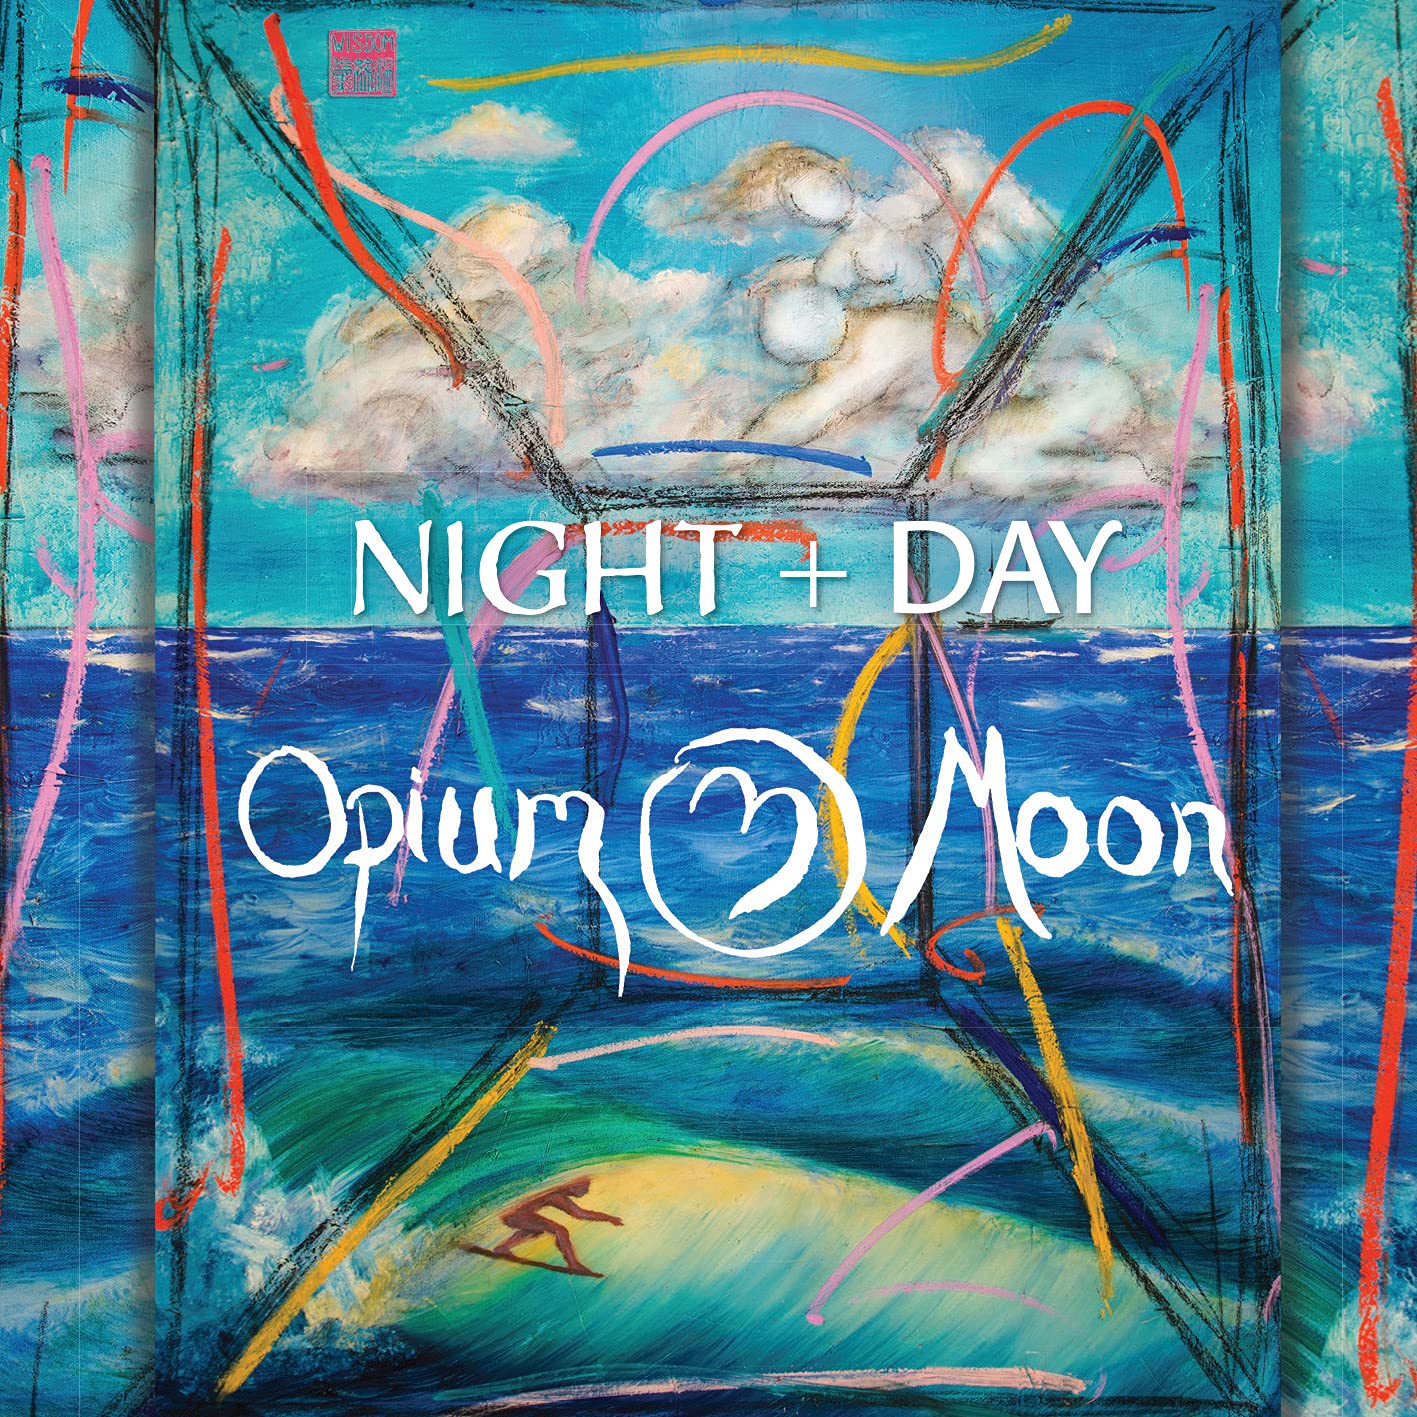 Album cover for Night and Day by Opium Moon.